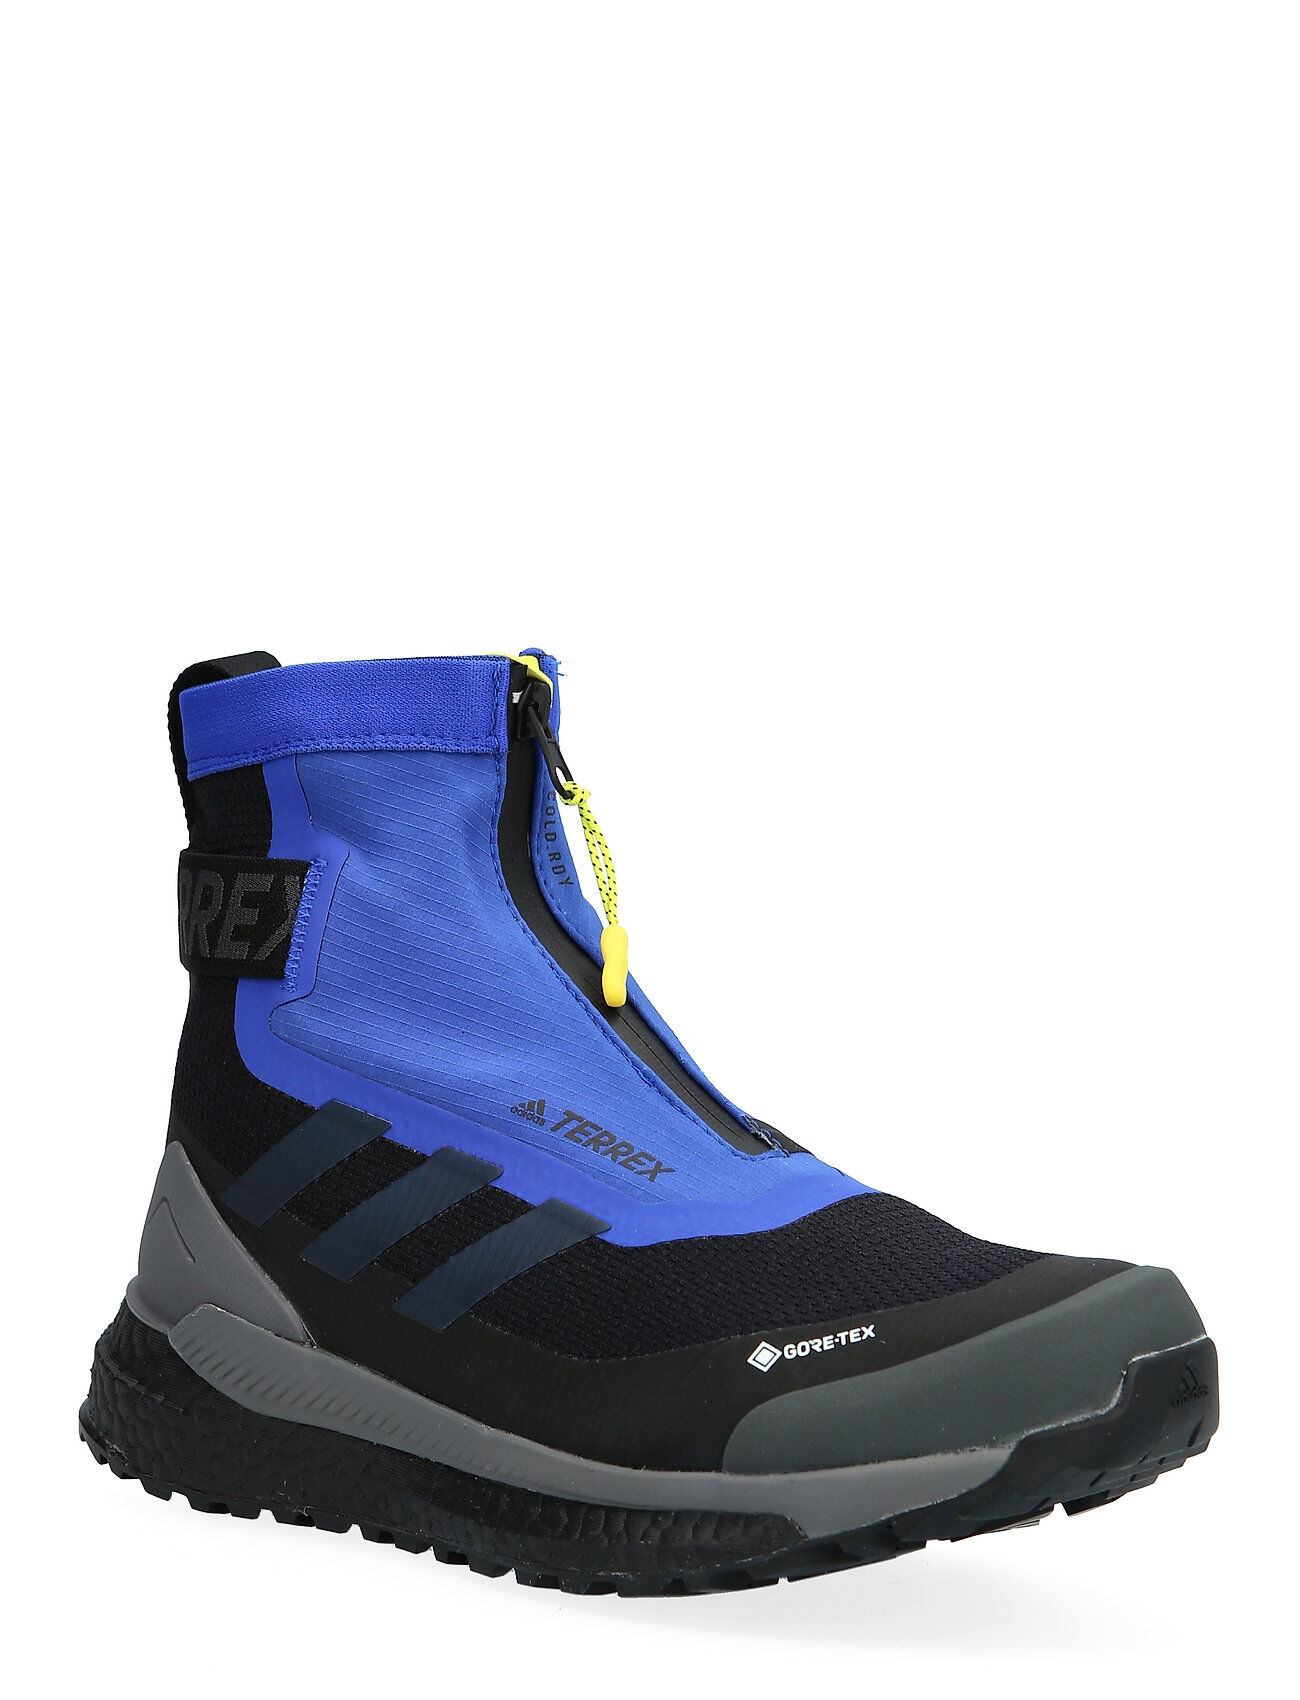 adidas Performance Terrex Free Hiker Cold.rdy Hiking Boots Shoes Sport Shoes Outdoor/hiking Shoes Blå Adidas Performance